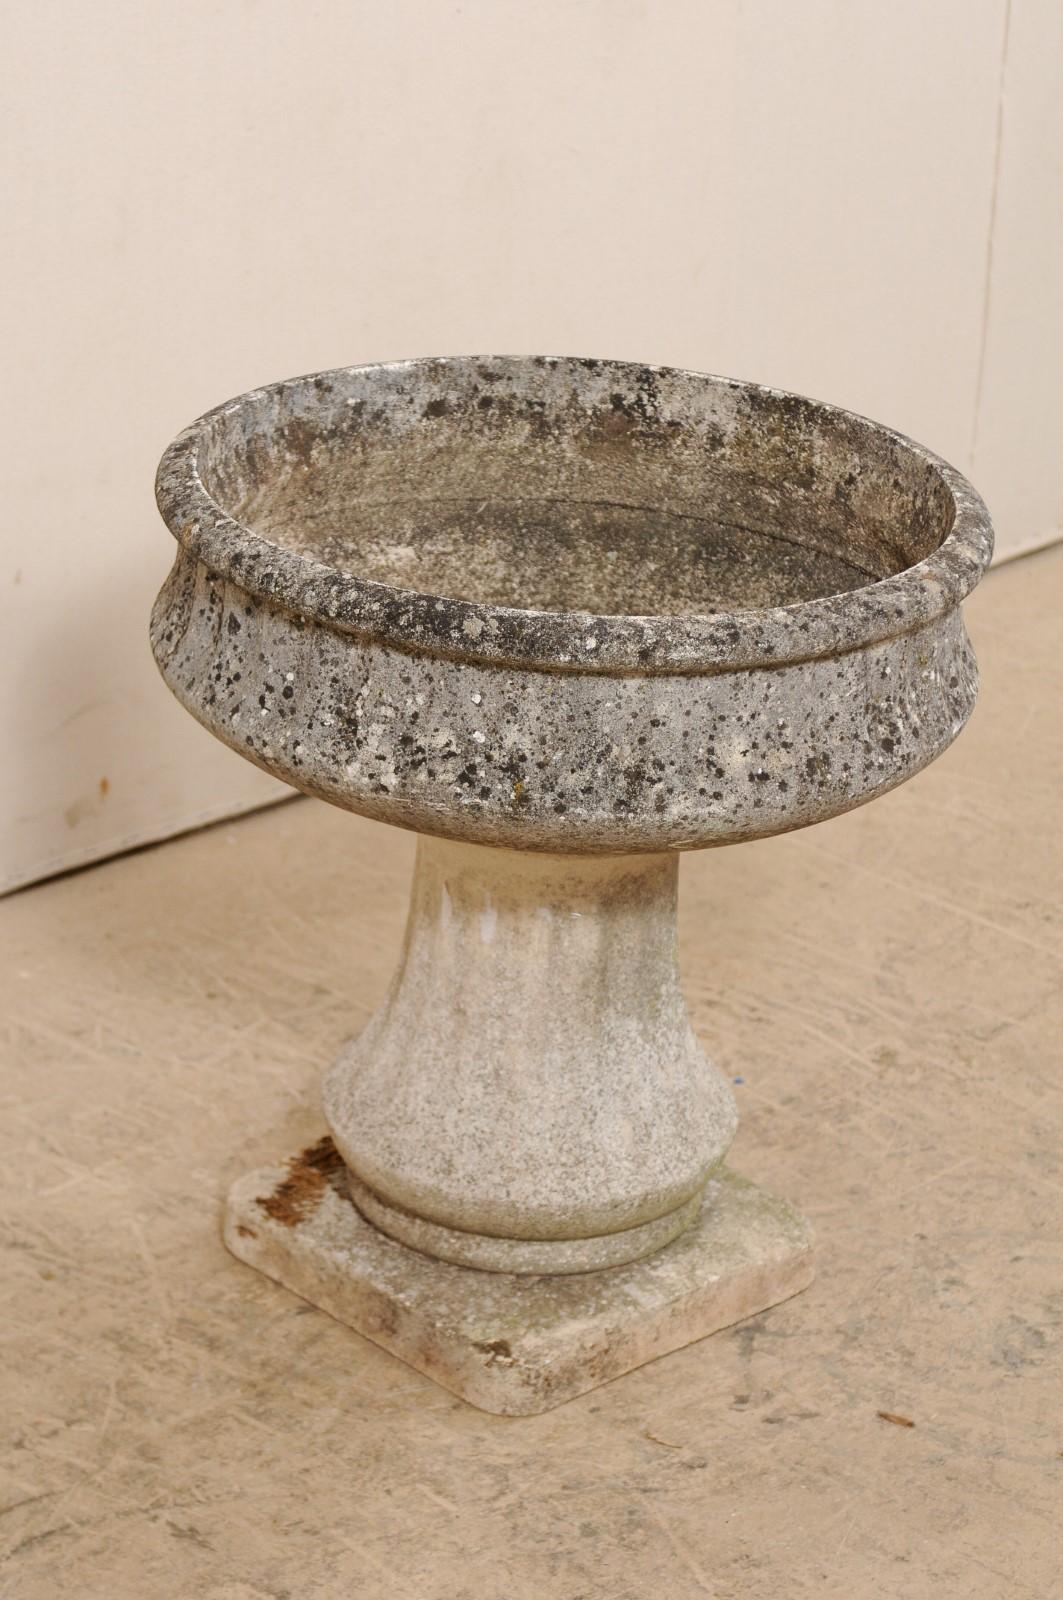 A French garden pedestal planter from the mid-20th century. This vintage cast-stone planter from France features a rounded vessel (approximately 8.75